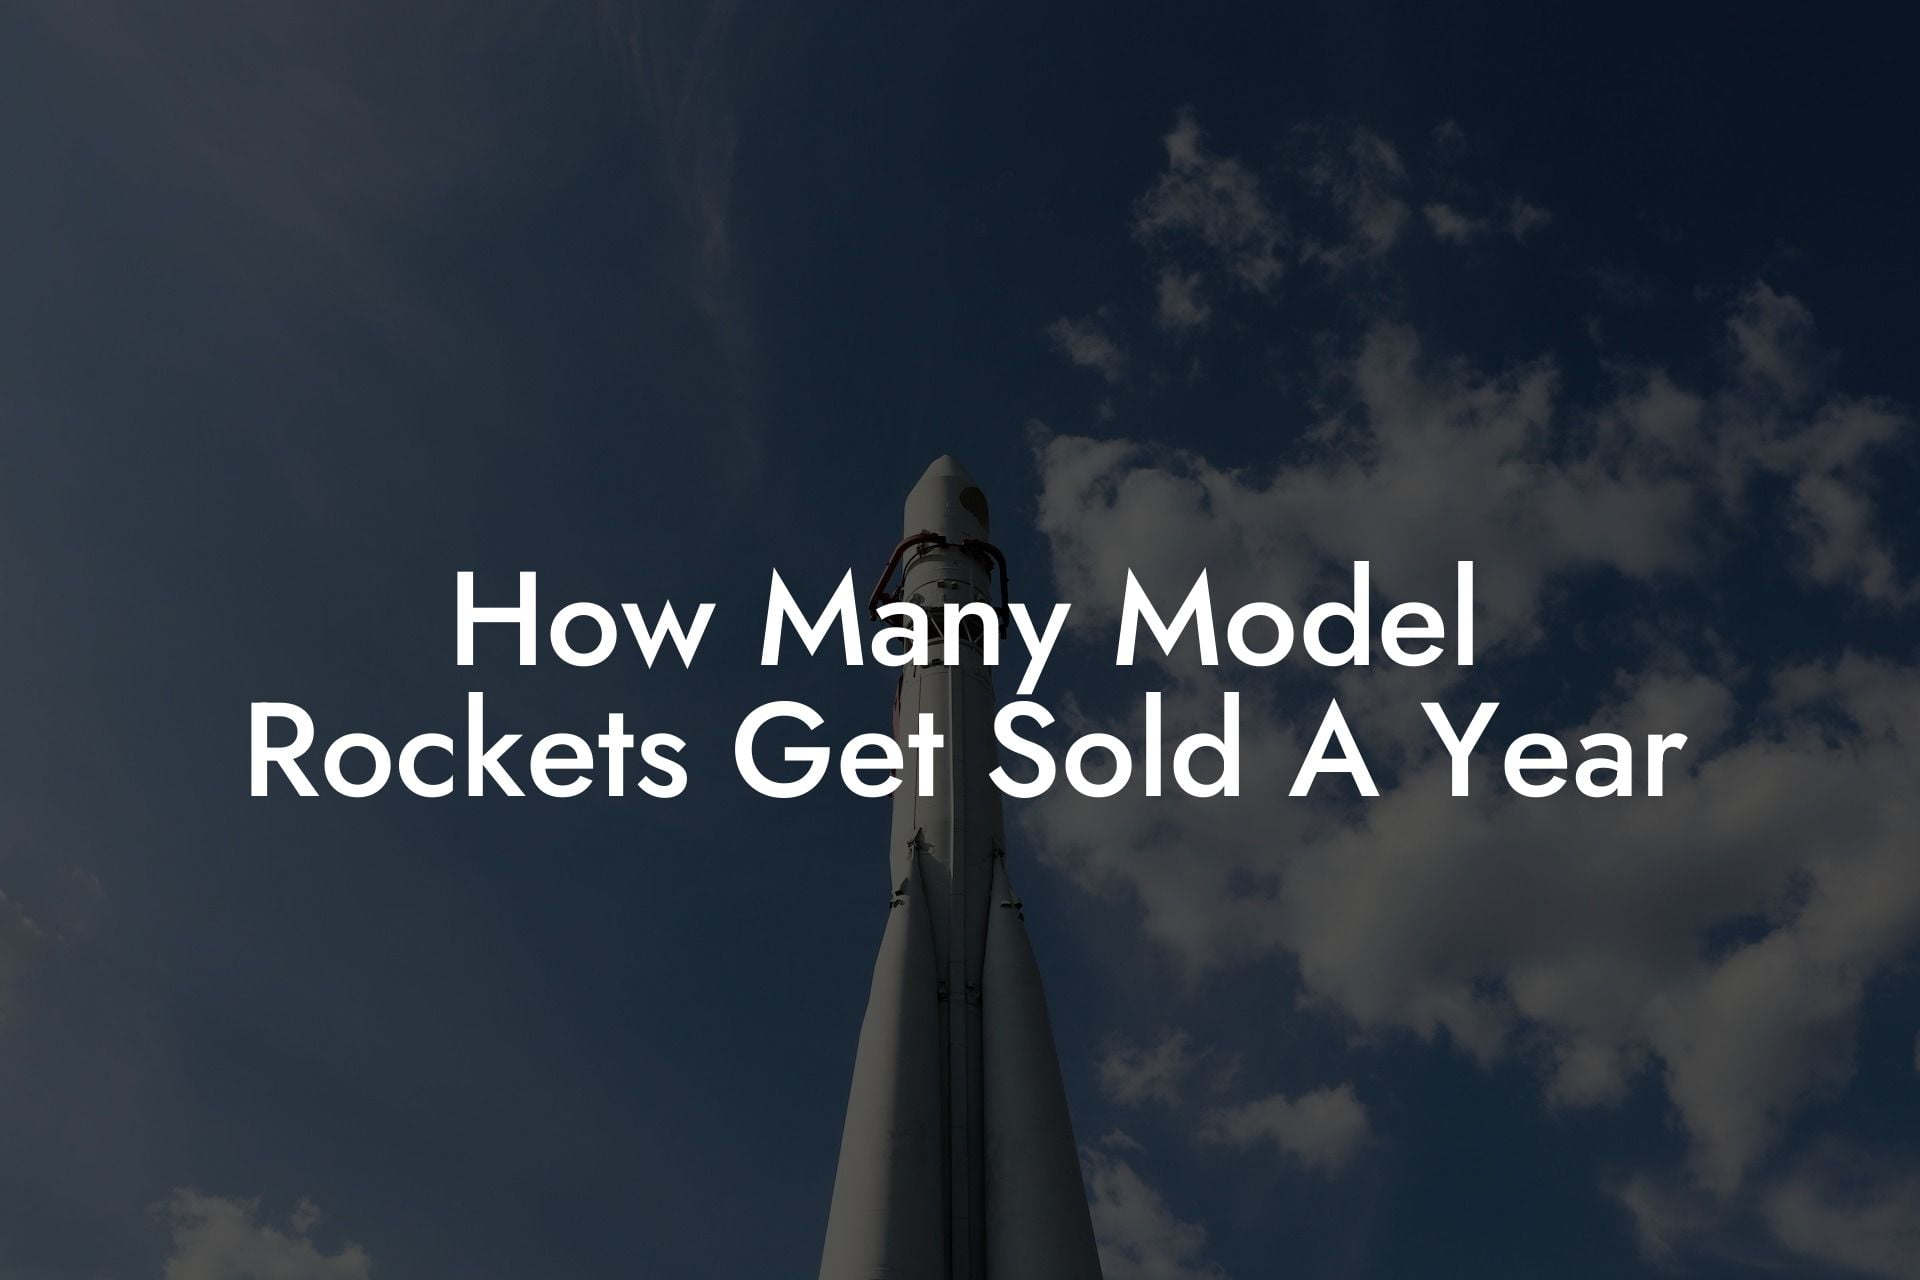 How Many Model Rockets Get Sold A Year